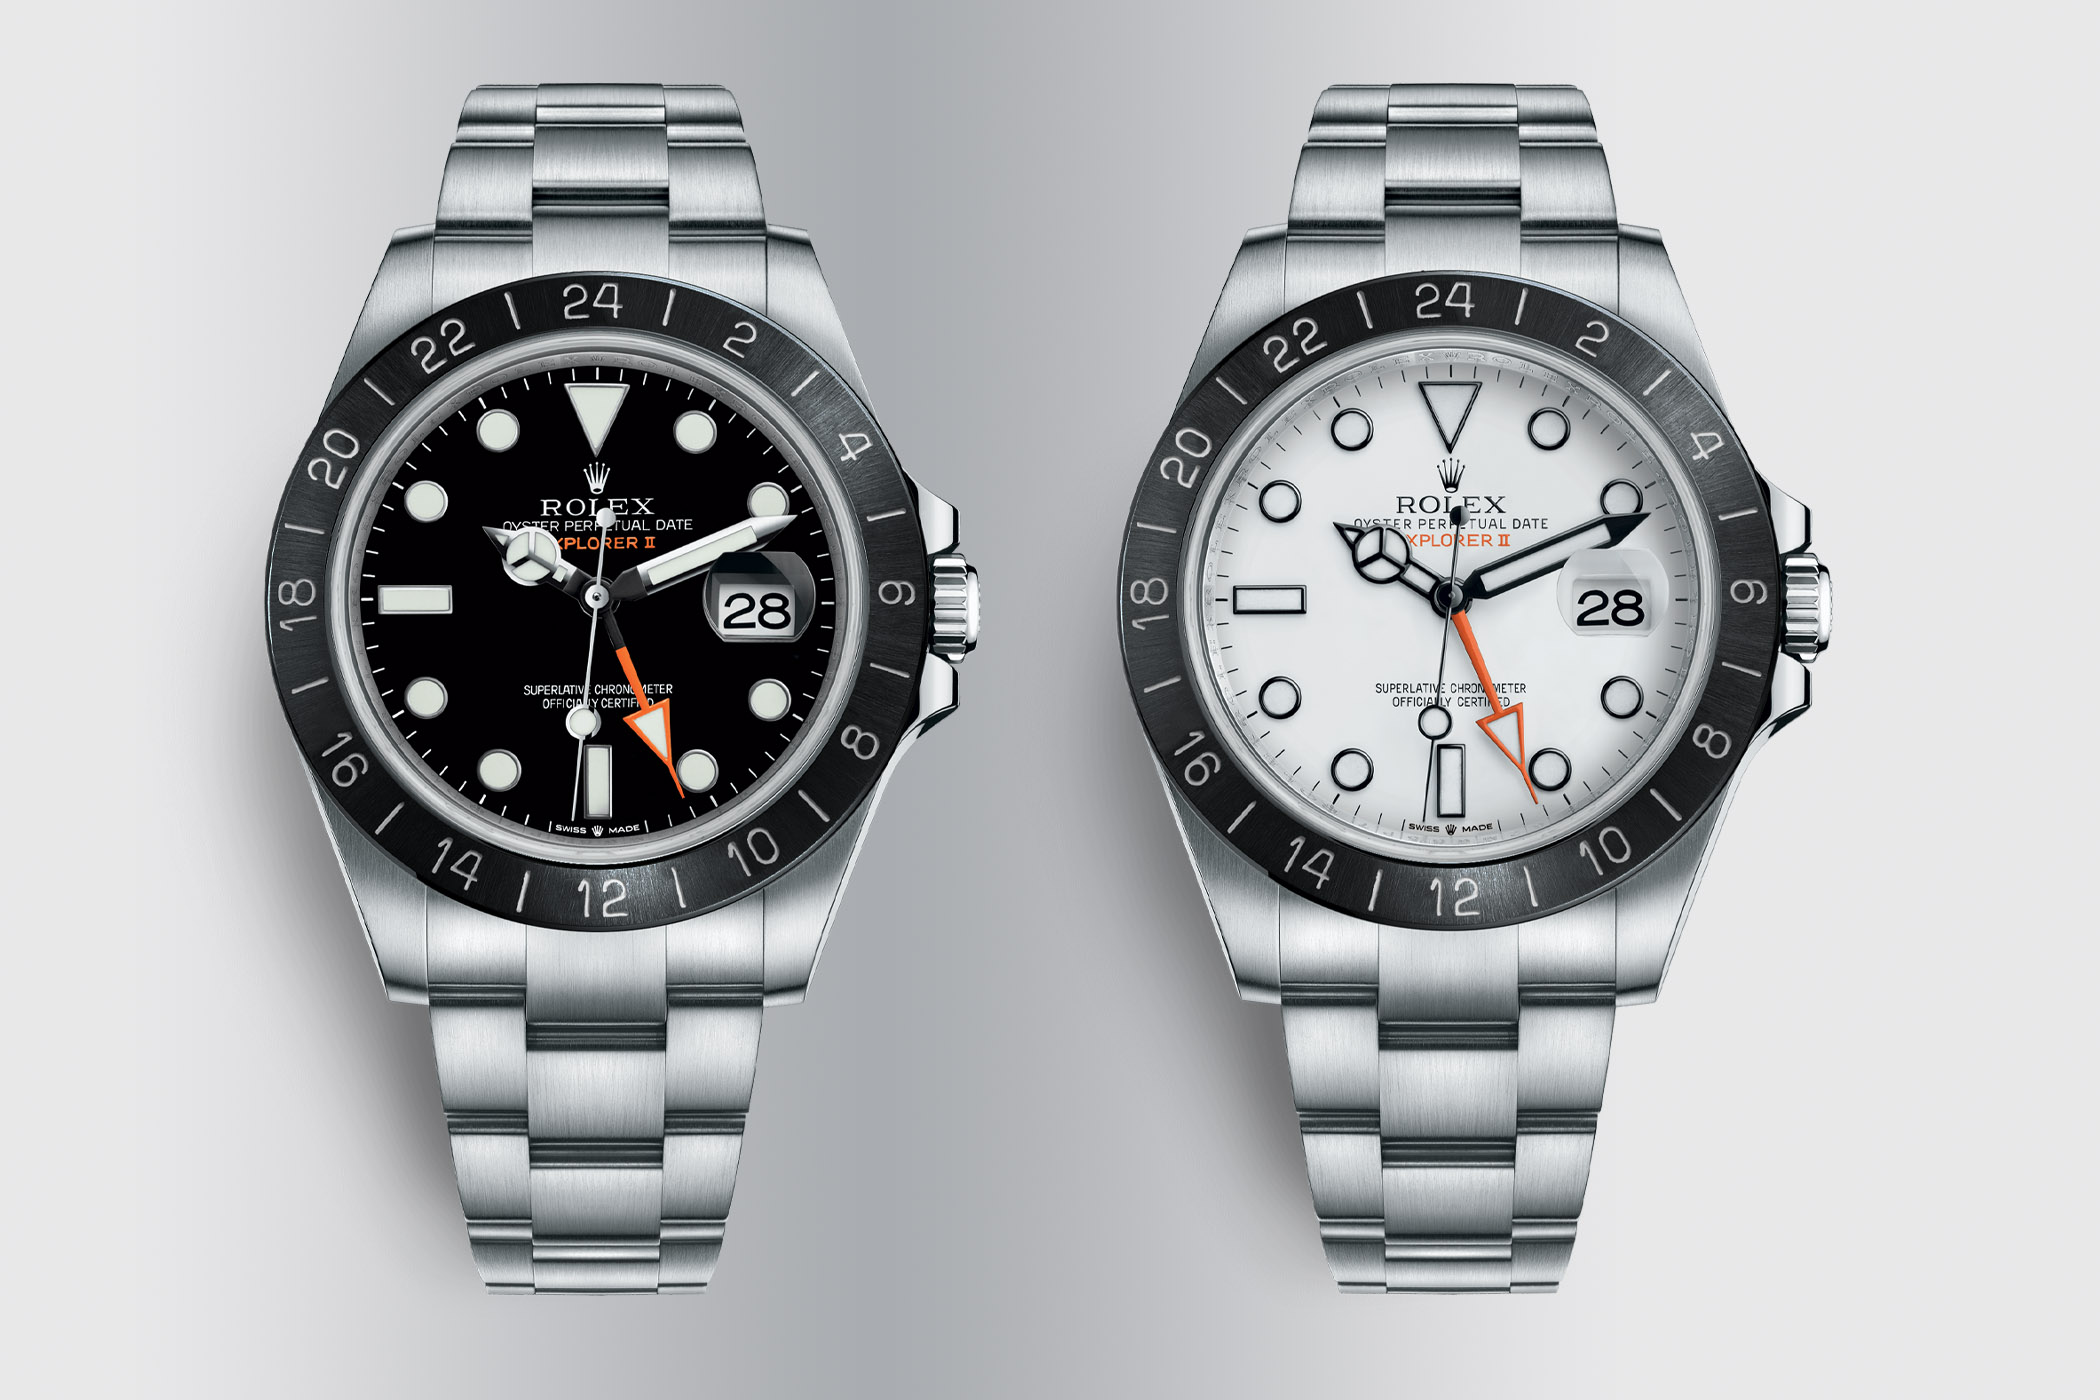 Vind At placere missil ROLEX PREDICTIONS 2021 – WHAT COULD BE THE NEW ROLEX EXPLORER II - City  Roma News